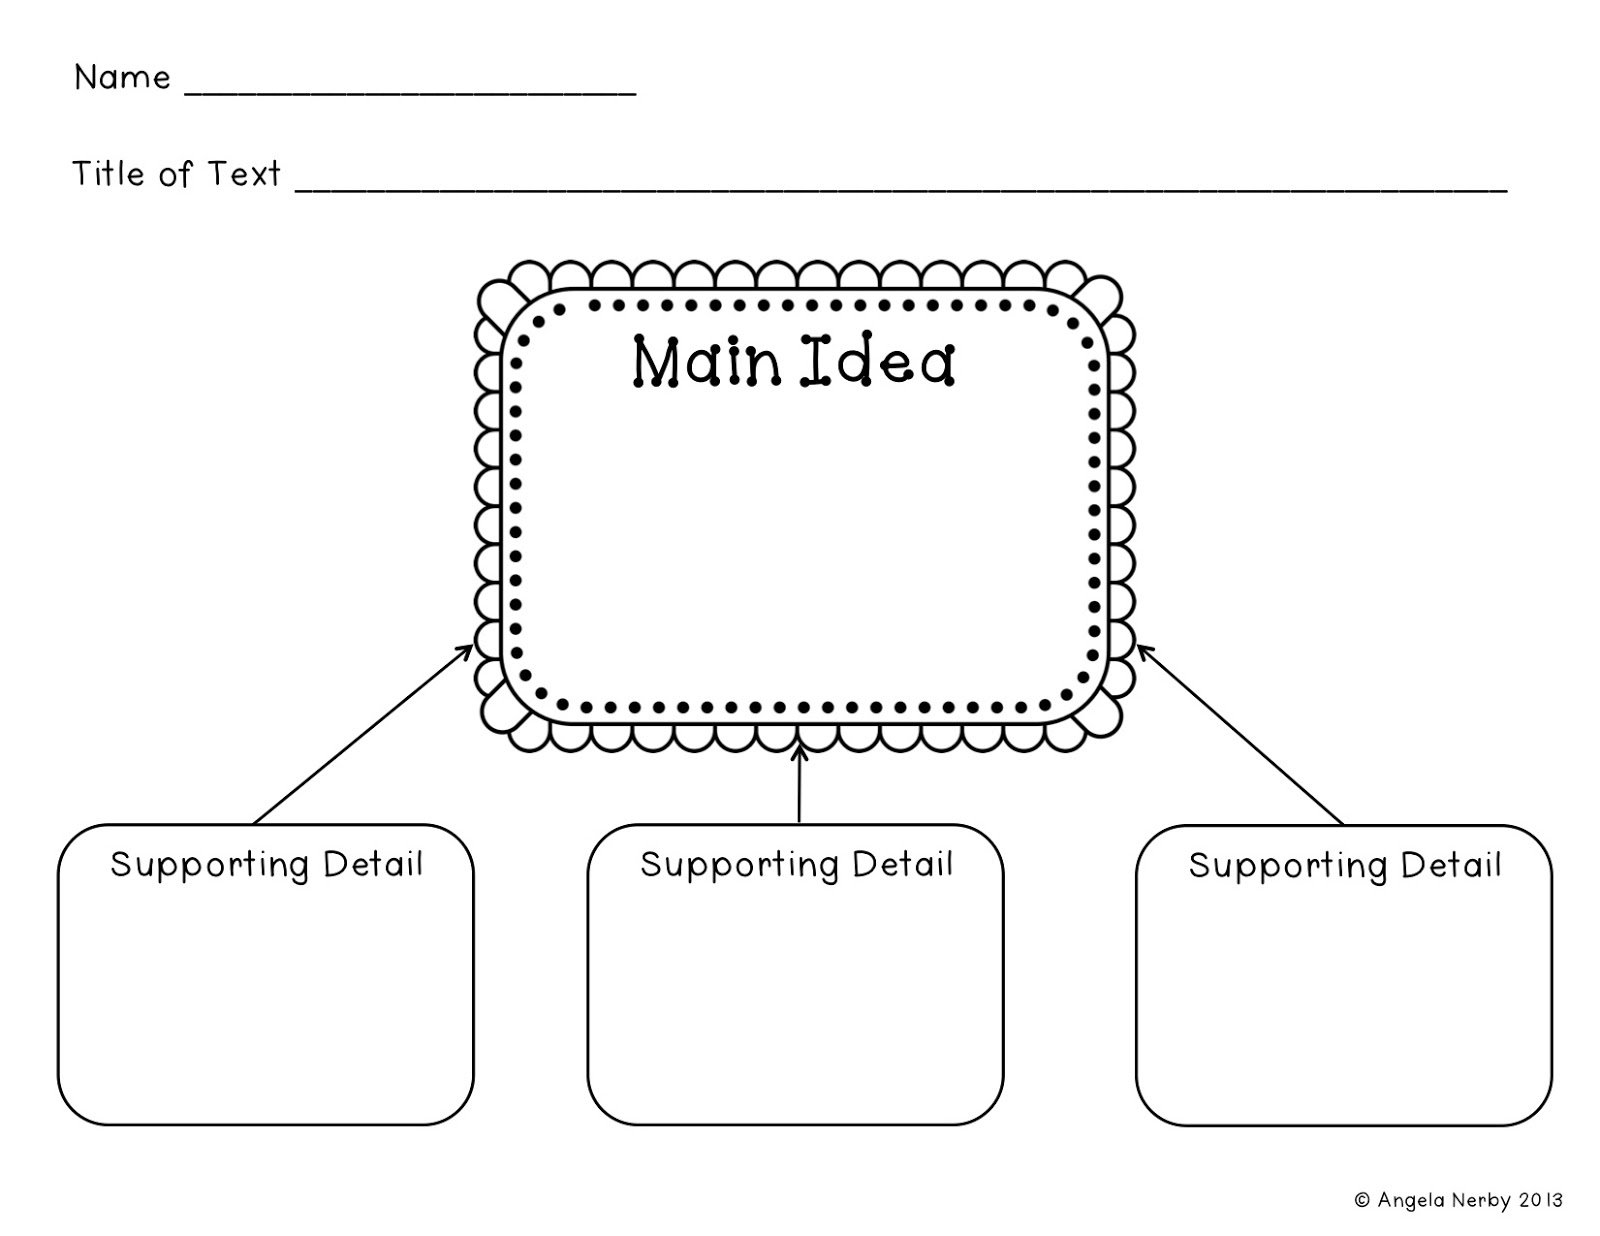 10 Most Popular Main Idea And Supporting Details Graphic Organizer main idea and supporting details graphic organizer worksheets for 5 2023